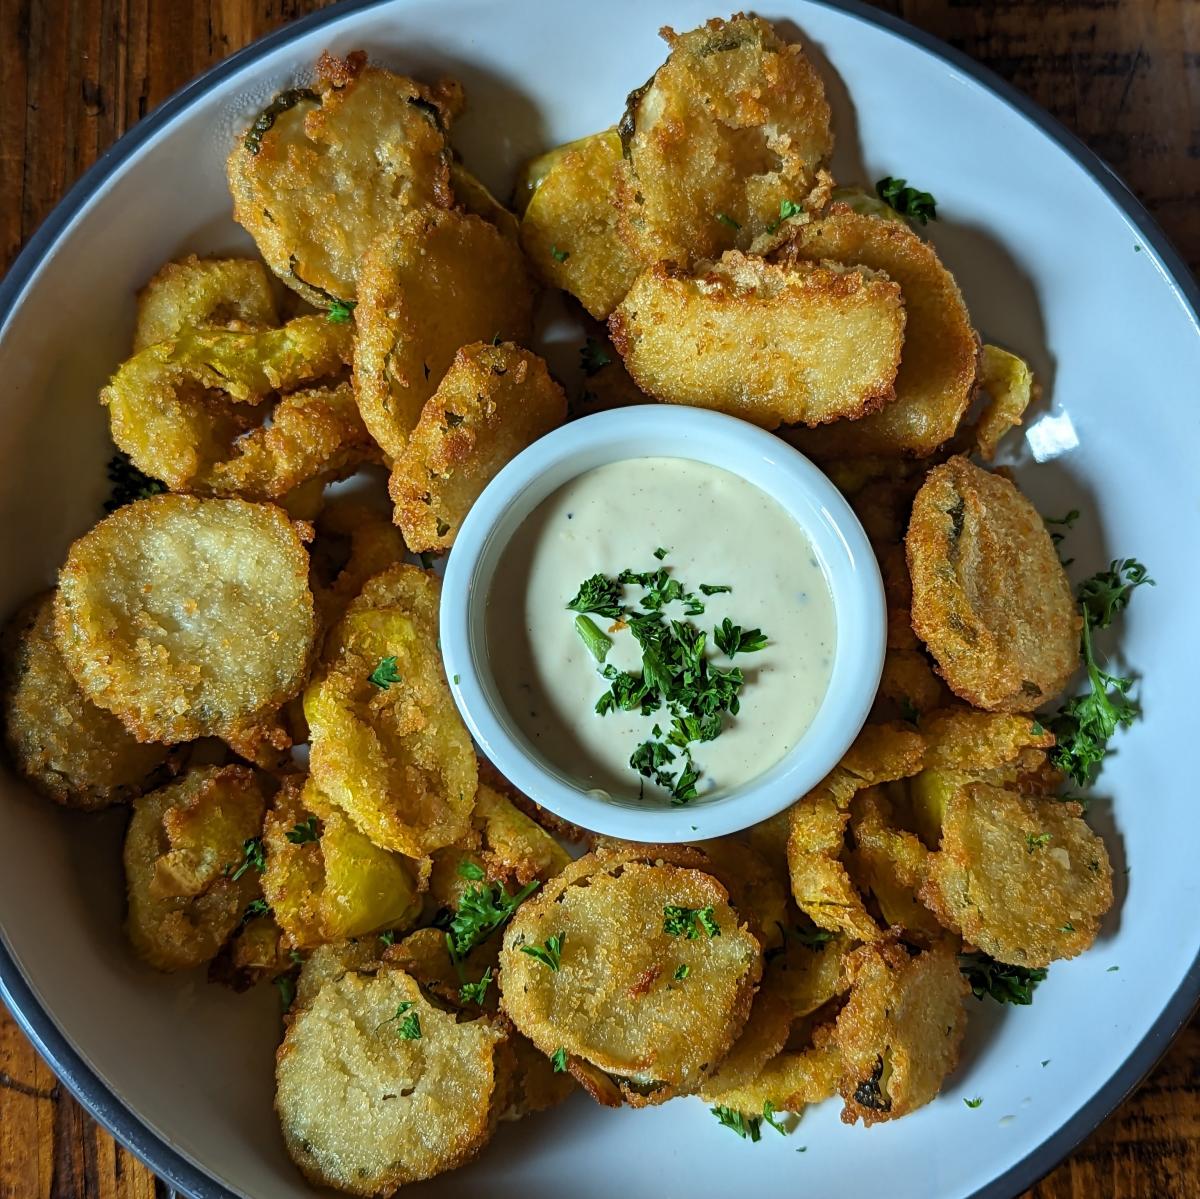 Image is of Shiner's Peter Pipers (fried pickles) in a bowl with a small cup of ranch dressing in the center.